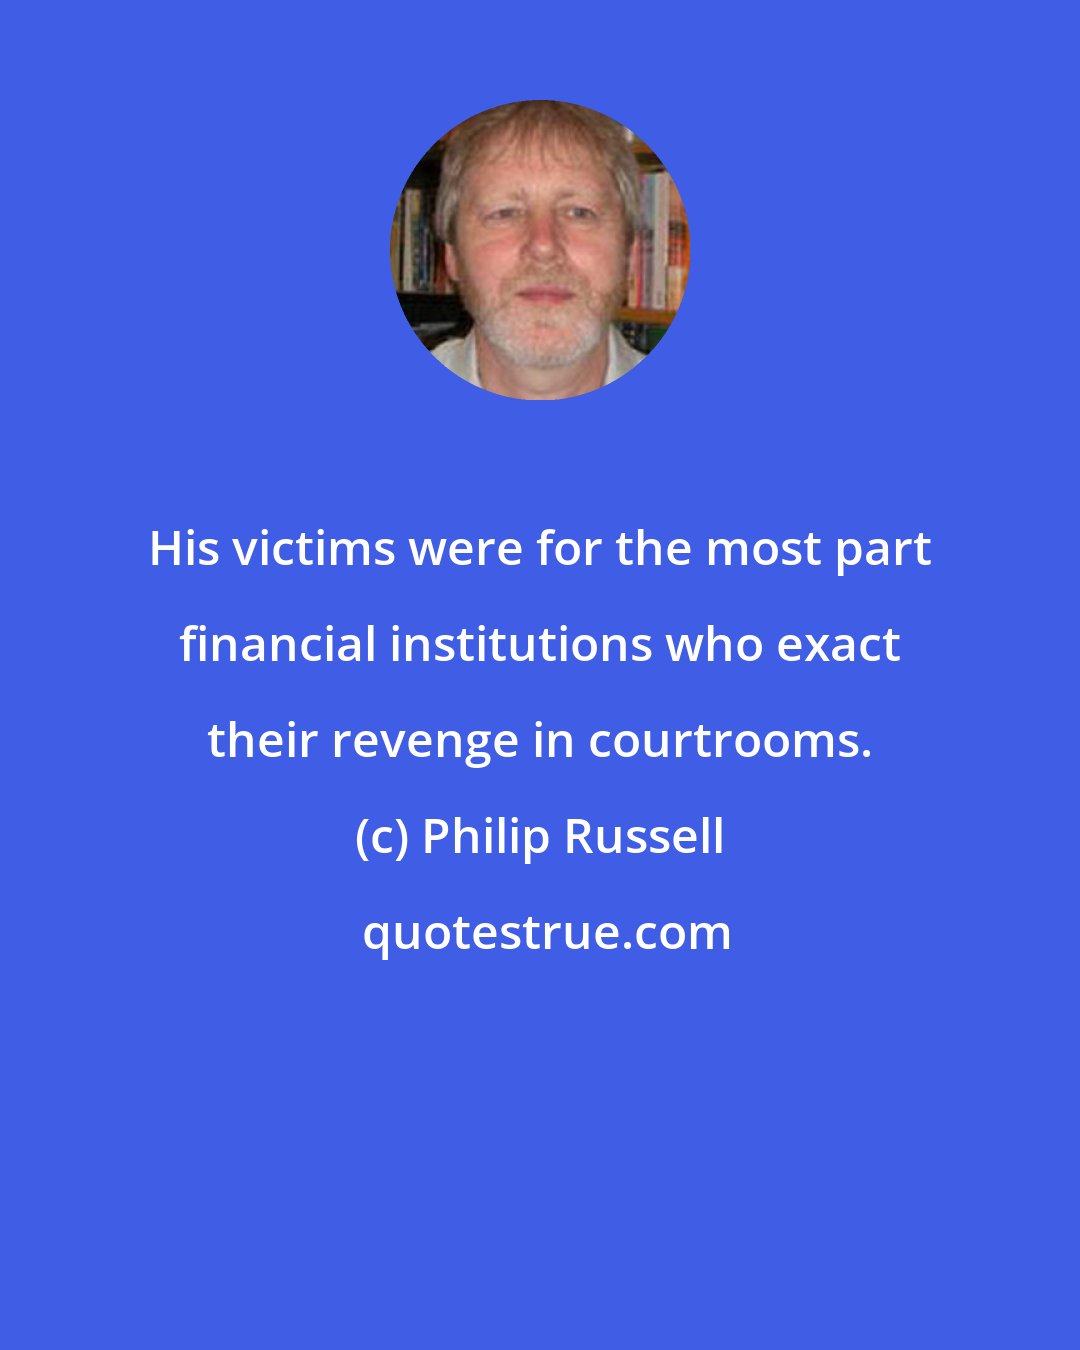 Philip Russell: His victims were for the most part financial institutions who exact their revenge in courtrooms.